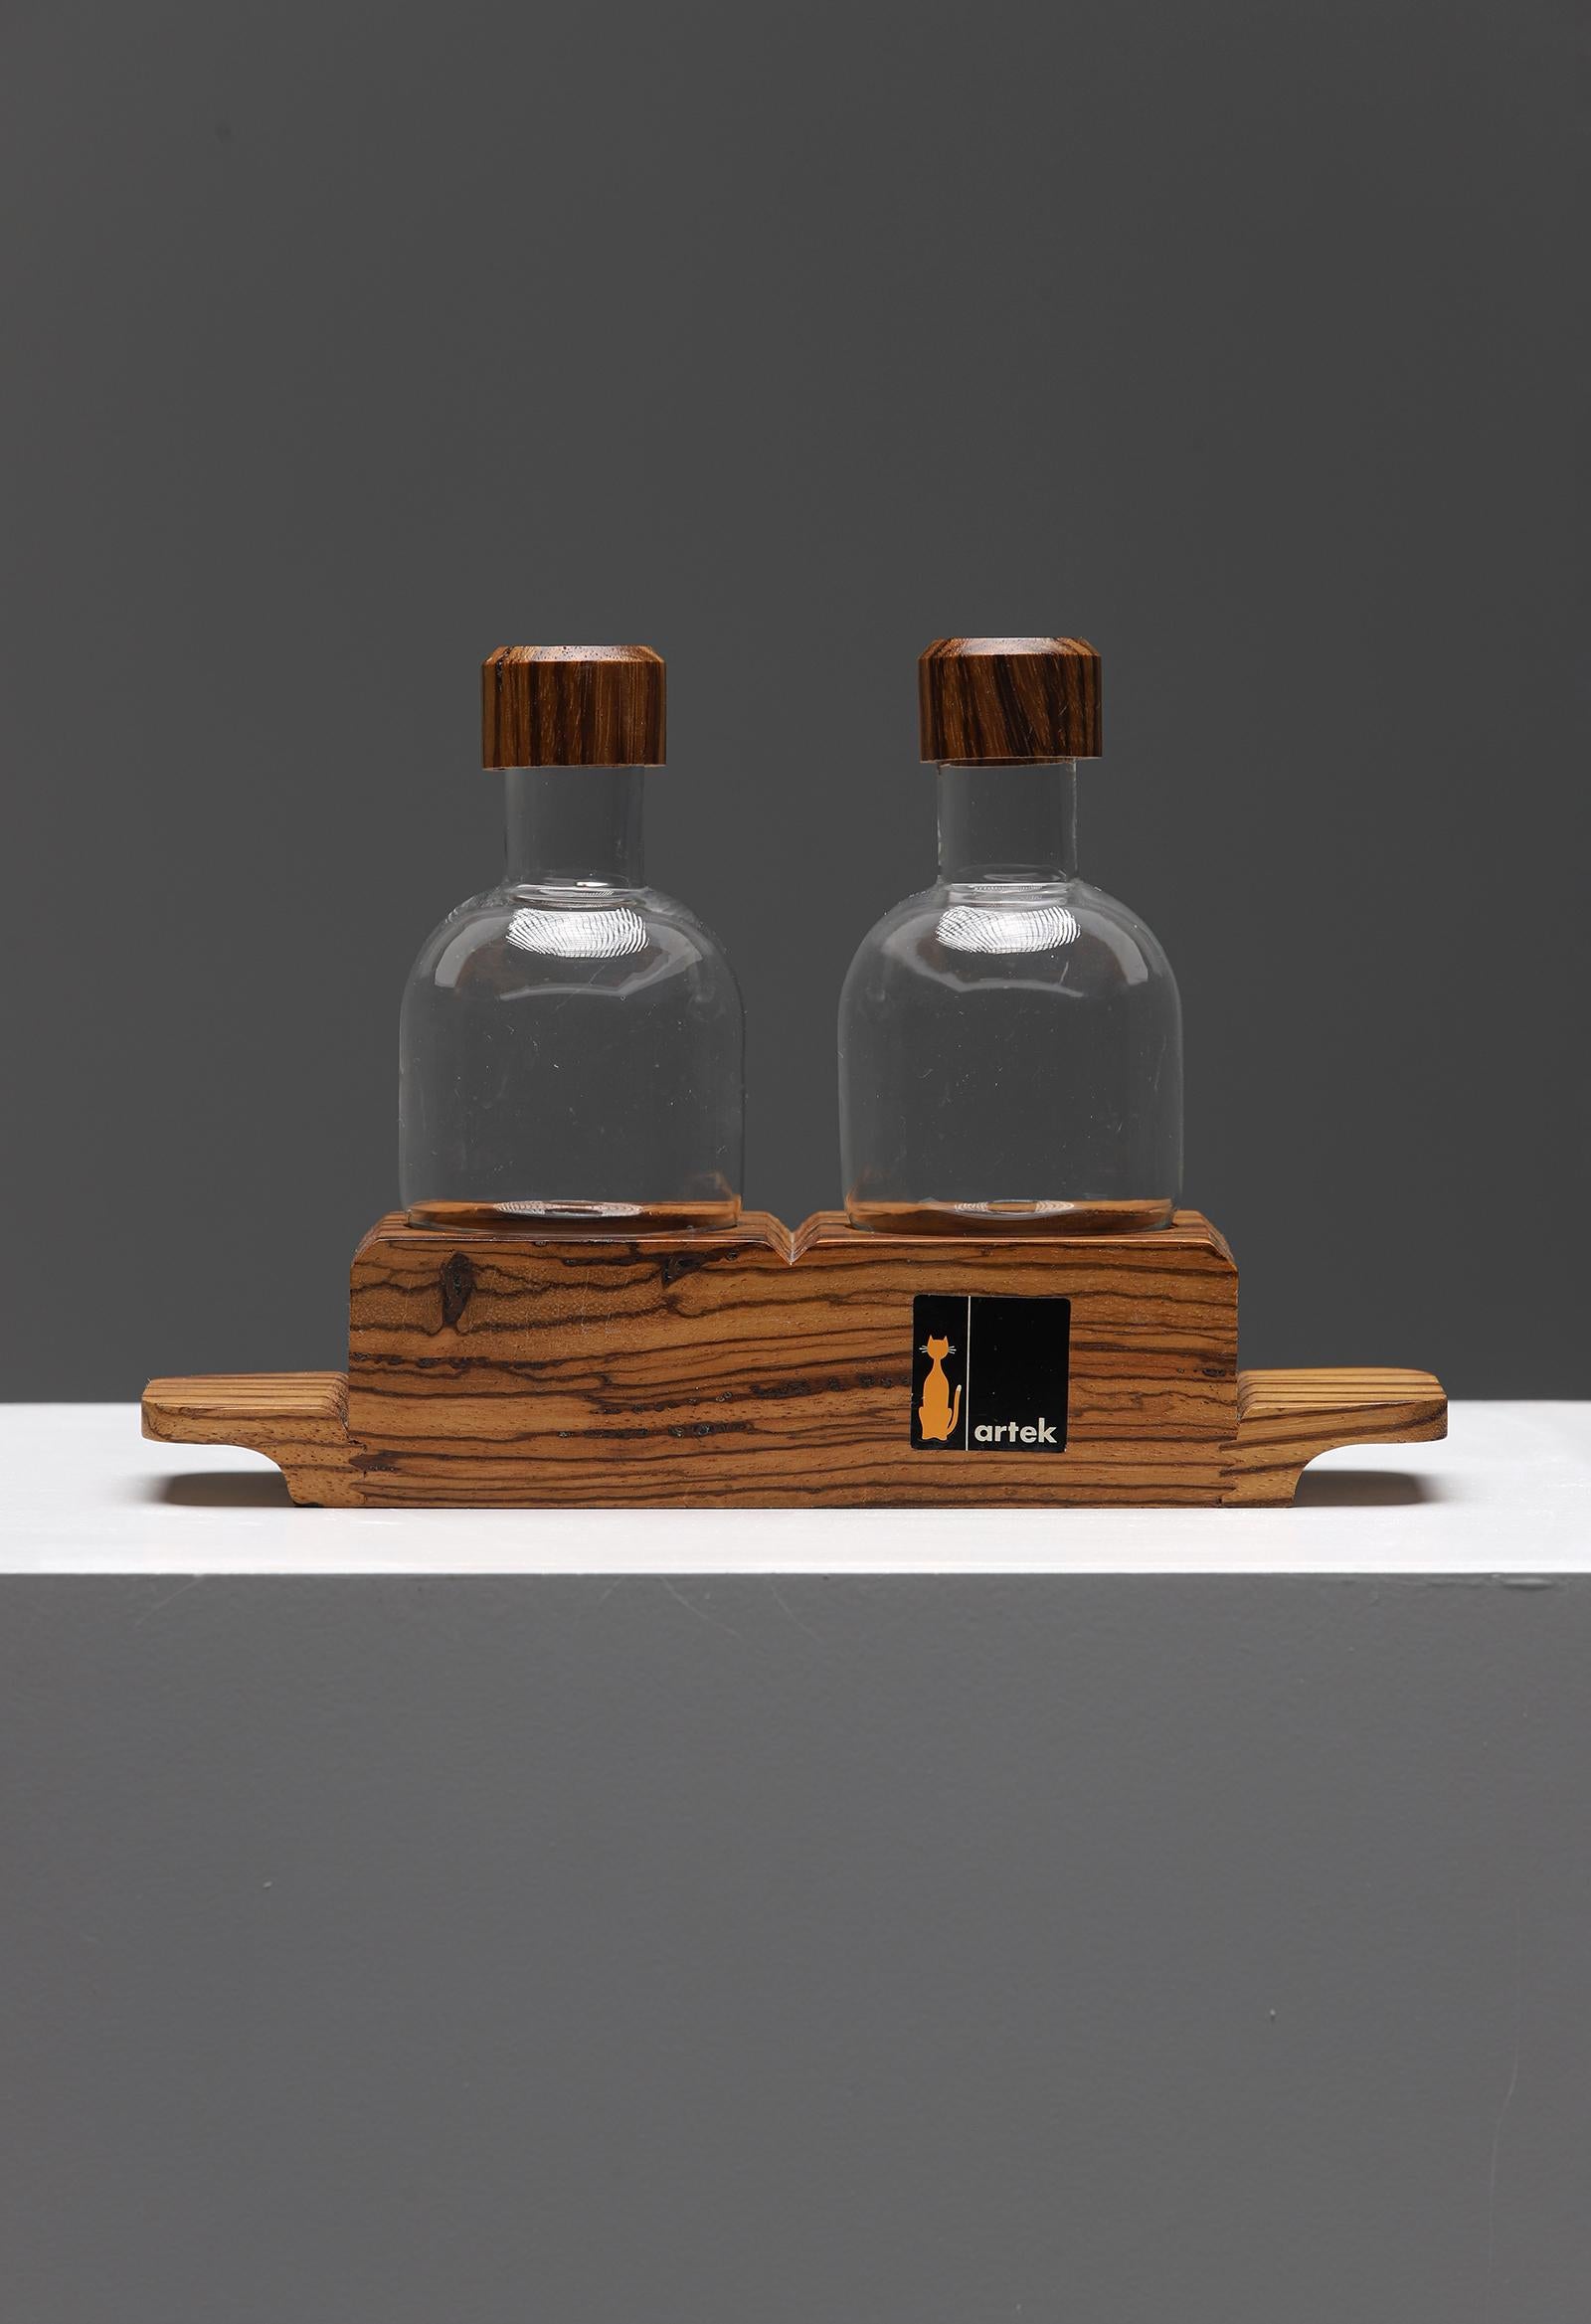 Mid Century olive oil and vinegar set designed and produced by Artek in the 1960s. Artek was founded in Helsinki in 1935 by four young idealists: Alvar and Aino Aalto, Maire Gullichsen and Nils-Gustav Hahl. They wanted to promote a modern culture of